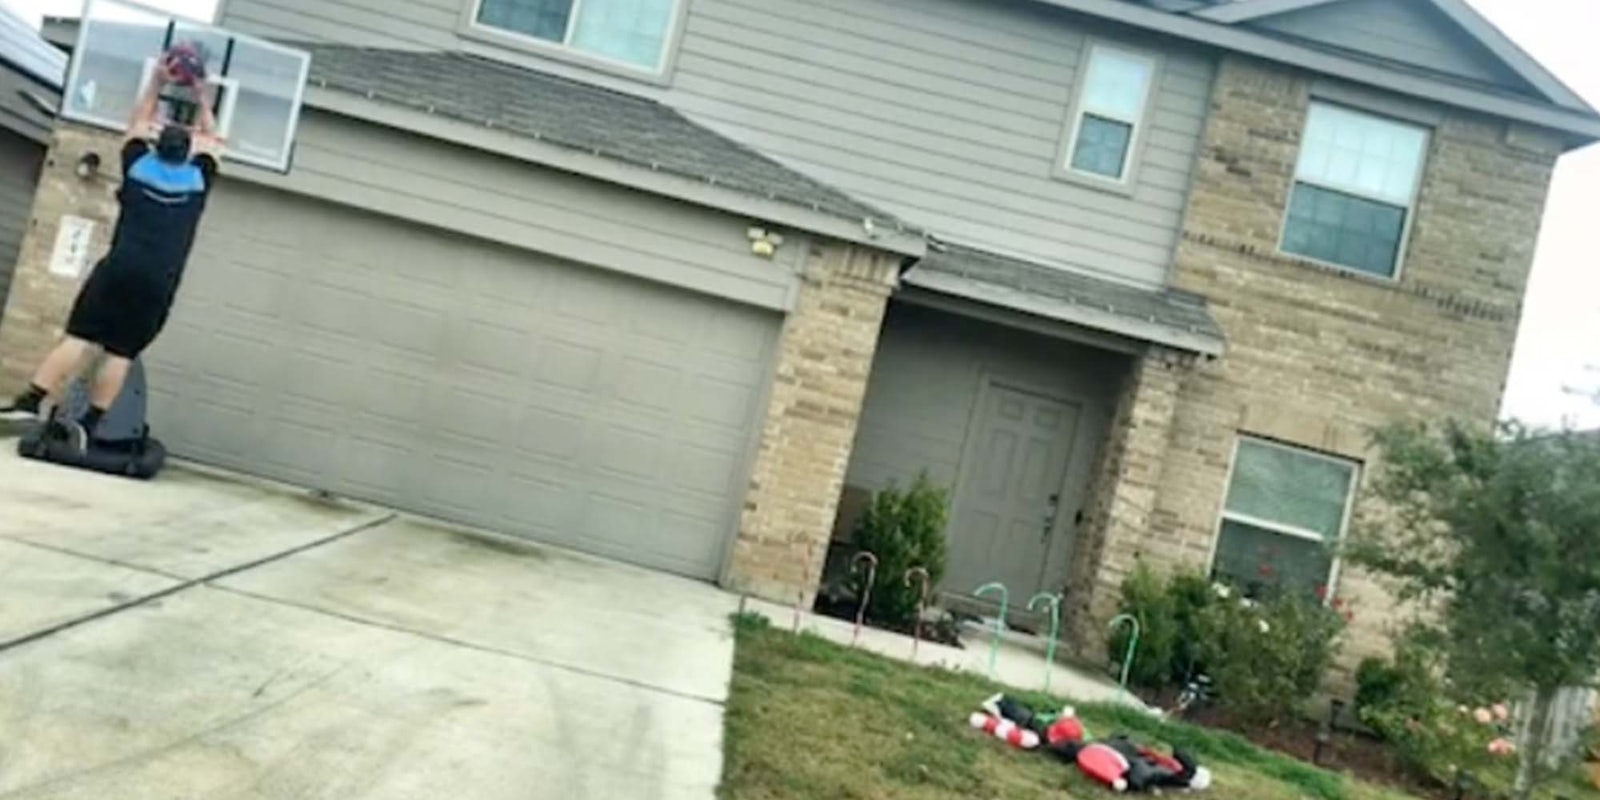 An Amazon delivery driver says he was fired after playing with a basketball in a customer's driveway.